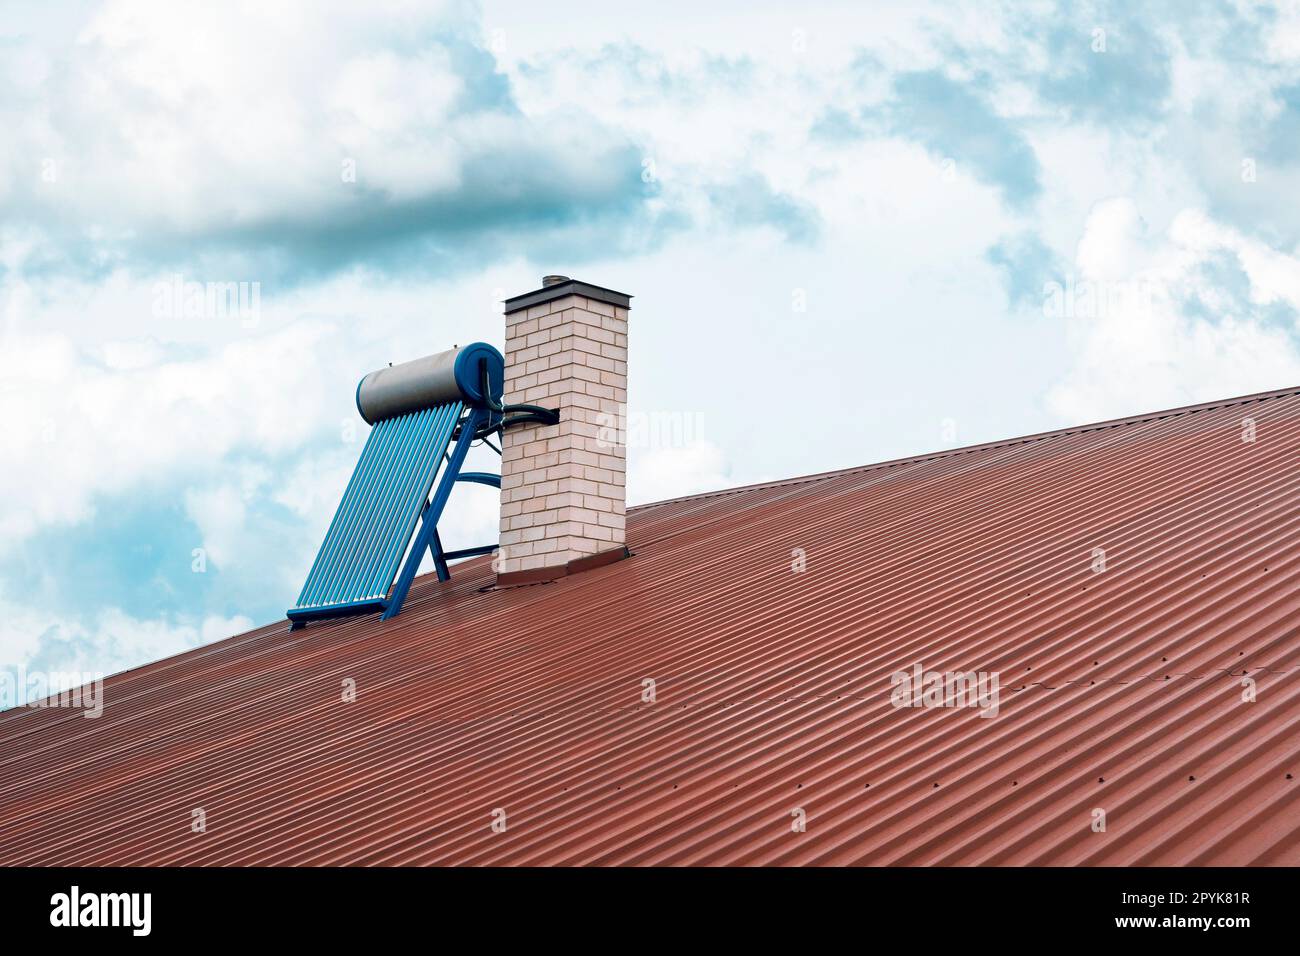 Solar water heater installed next to chimney on a red roof Stock Photo